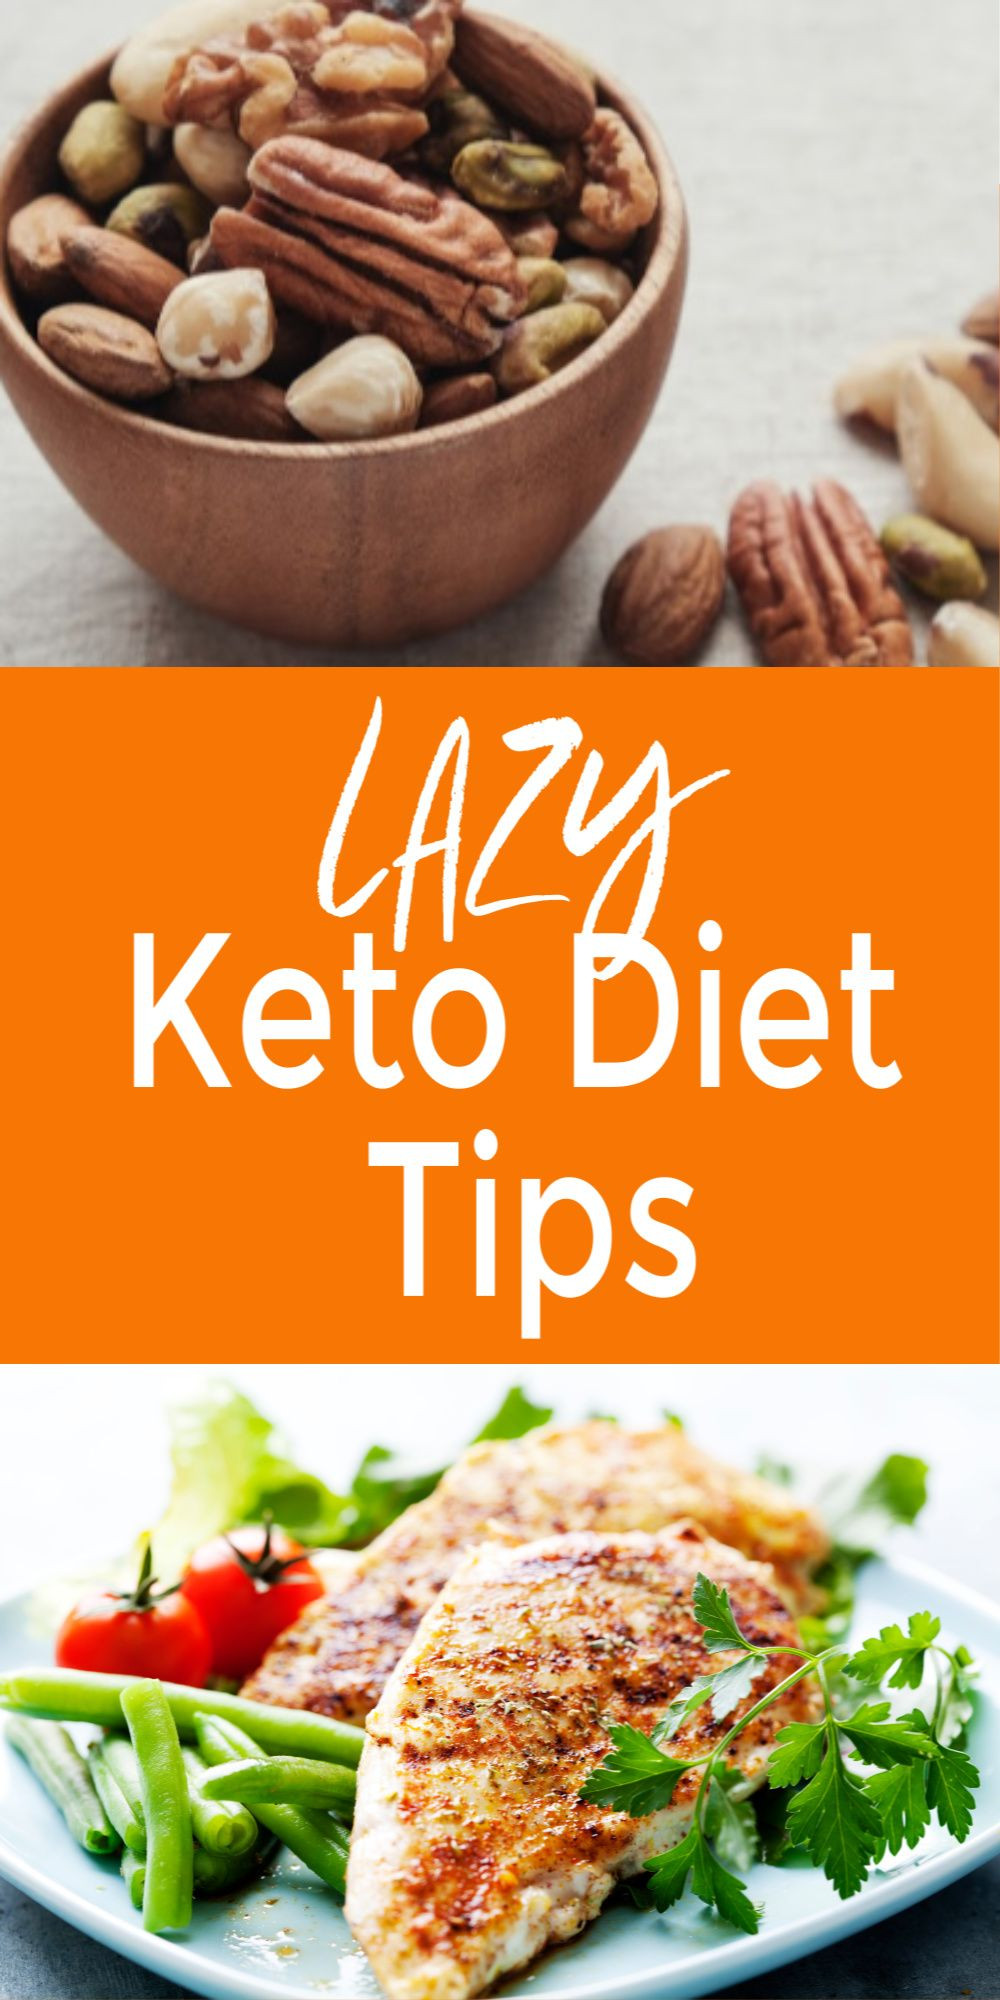 Lazy Keto Diet For Beginners
 What You Should Know About the Lazy Keto Diet